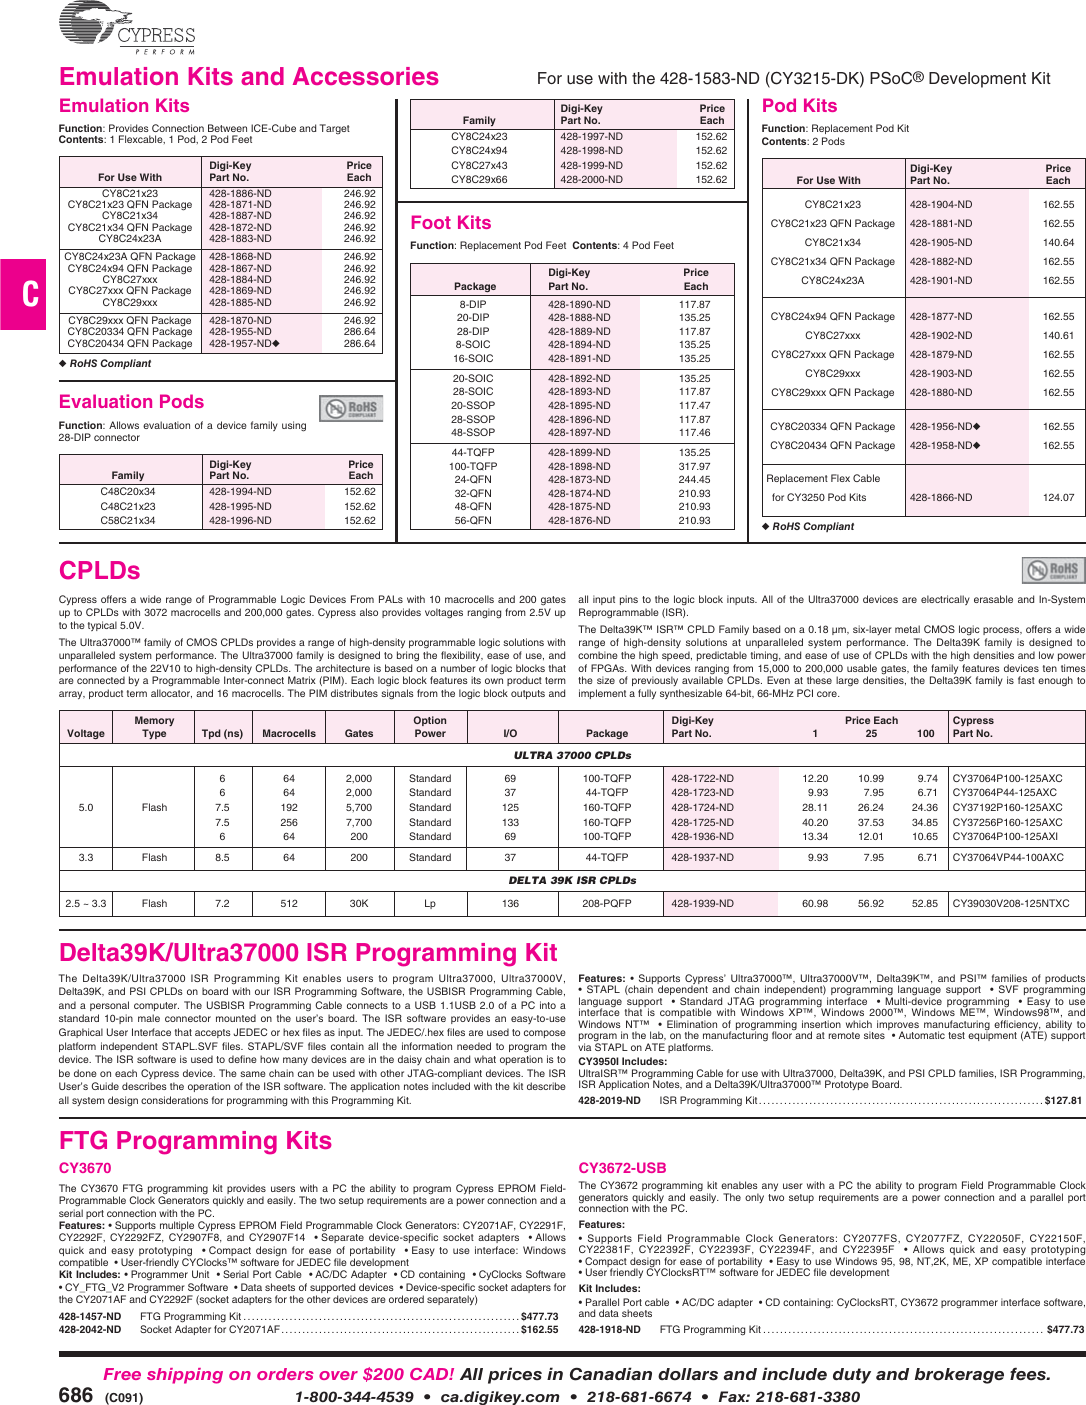 Page 4 of 6 - Cypress Cypress-Psoc-Firsttouch-Cy3261A-Rgb-Users-Manual- Digi-Key Catalog C091 Pages 0683-0688  Cypress-psoc-firsttouch-cy3261a-rgb-users-manual